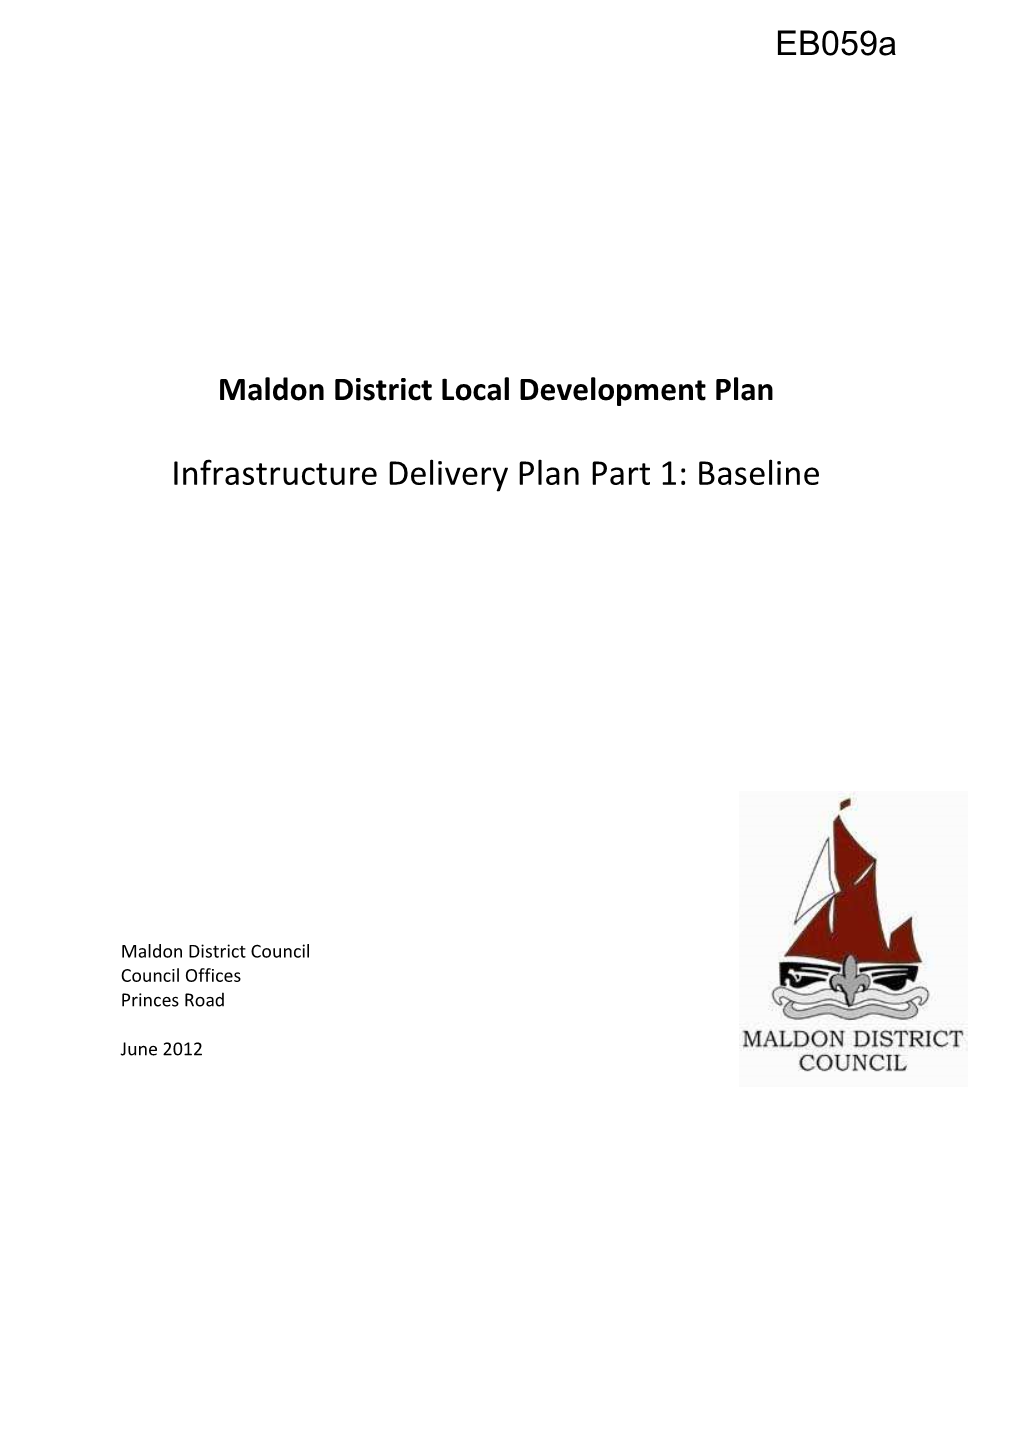 13..06.12 Maldon District Infrastructure Delivery Plan